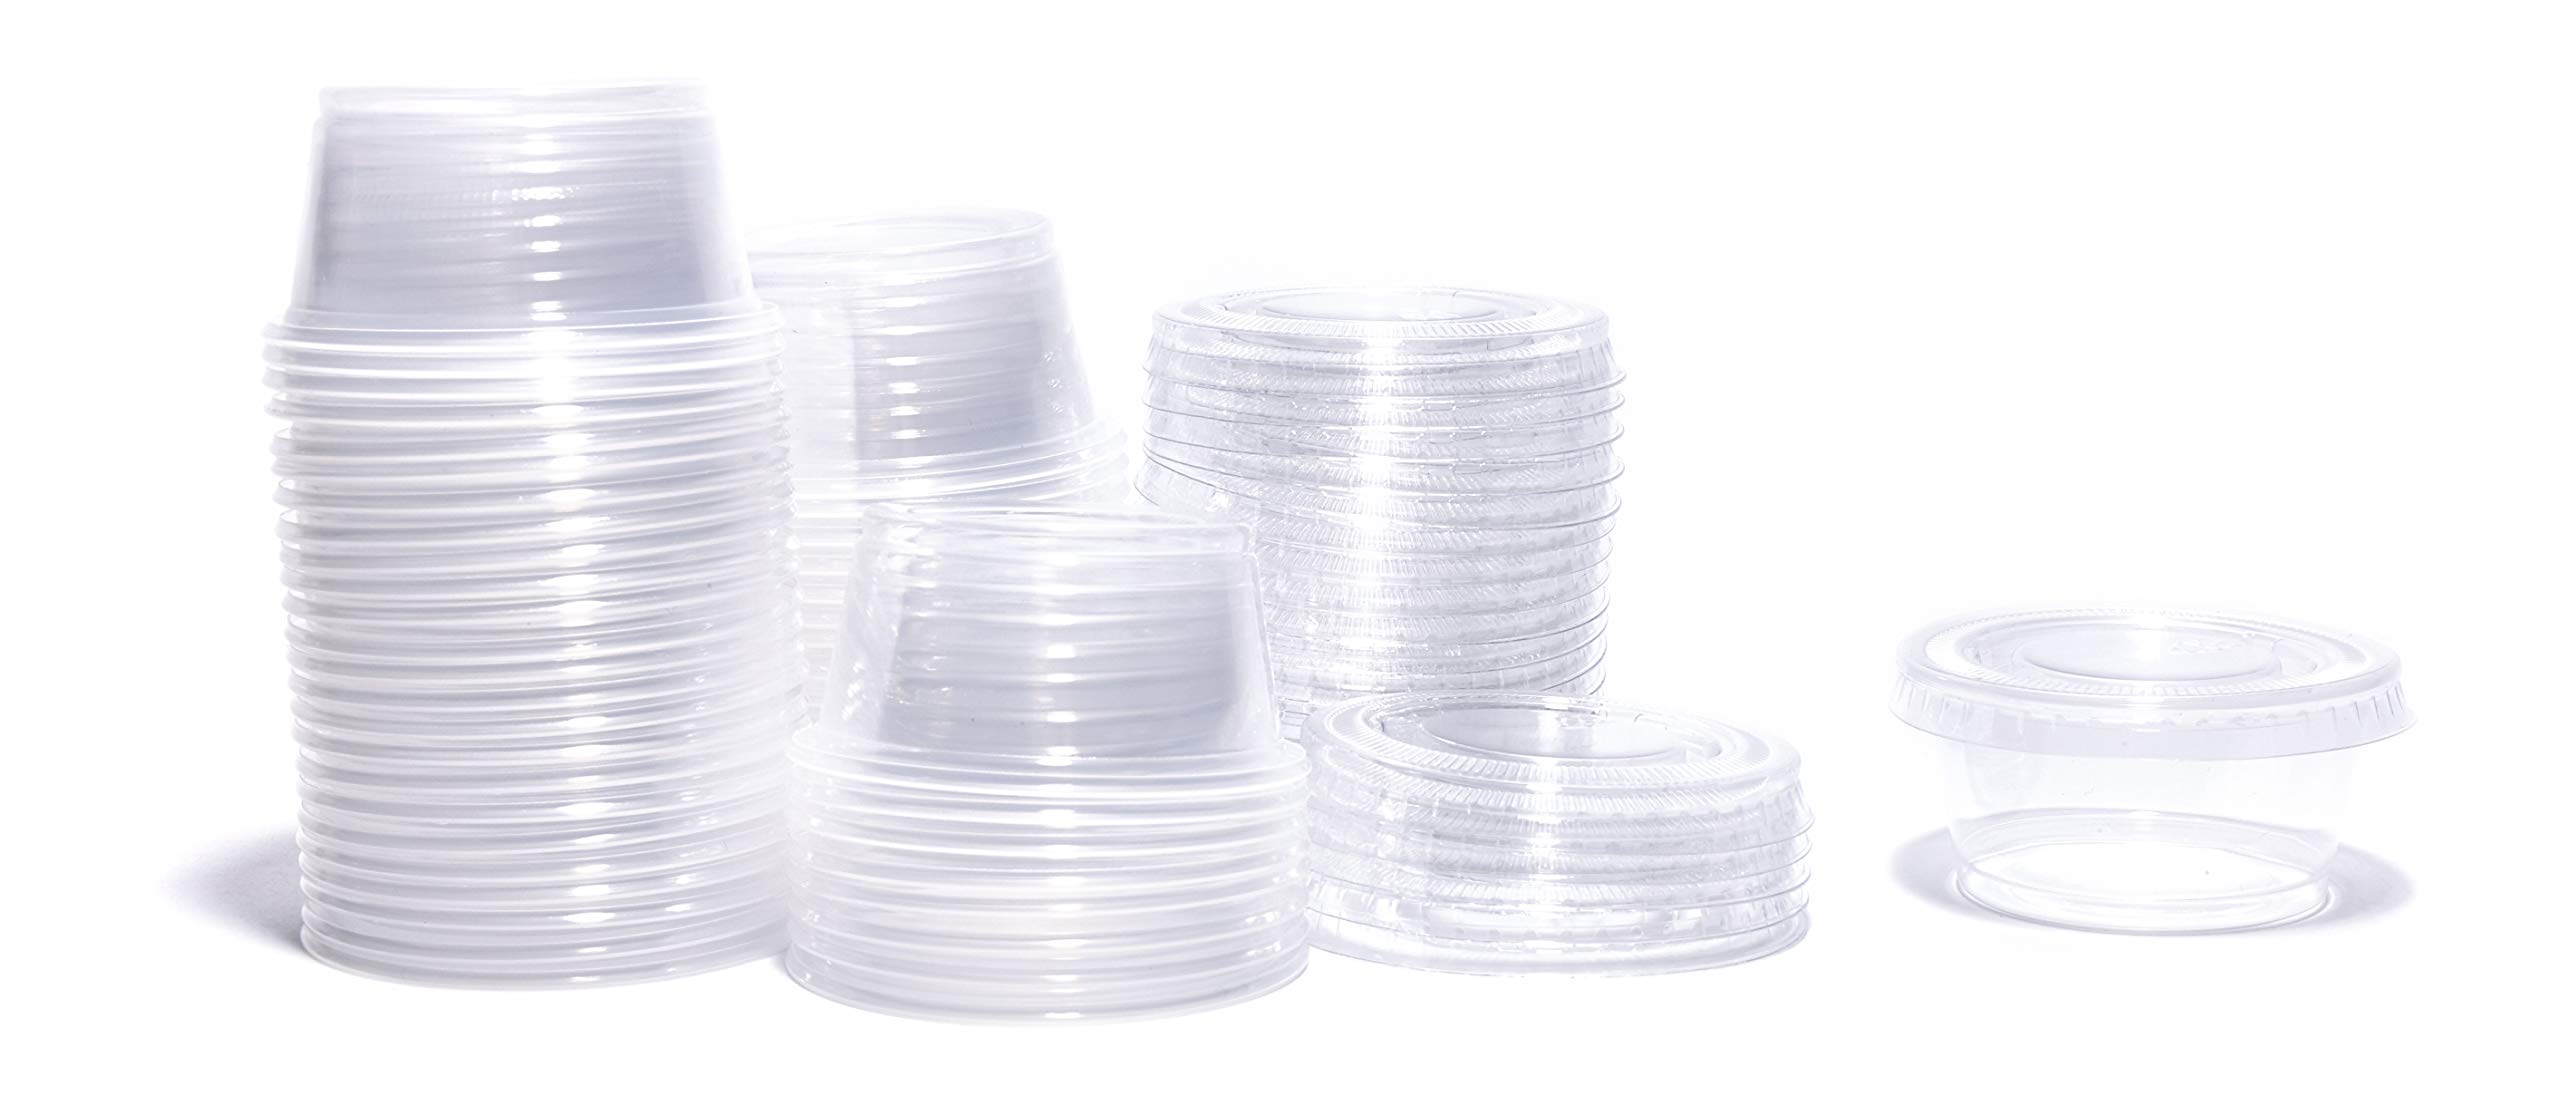 Disposable 2 oz. Plastic Portion Cups with Lids (100-Count) Jello Shots, Condiments, Samples, Sauce, Souffle | BPA Free, Food-Grade Safe | Clear, Ecofriendly, Recyclable